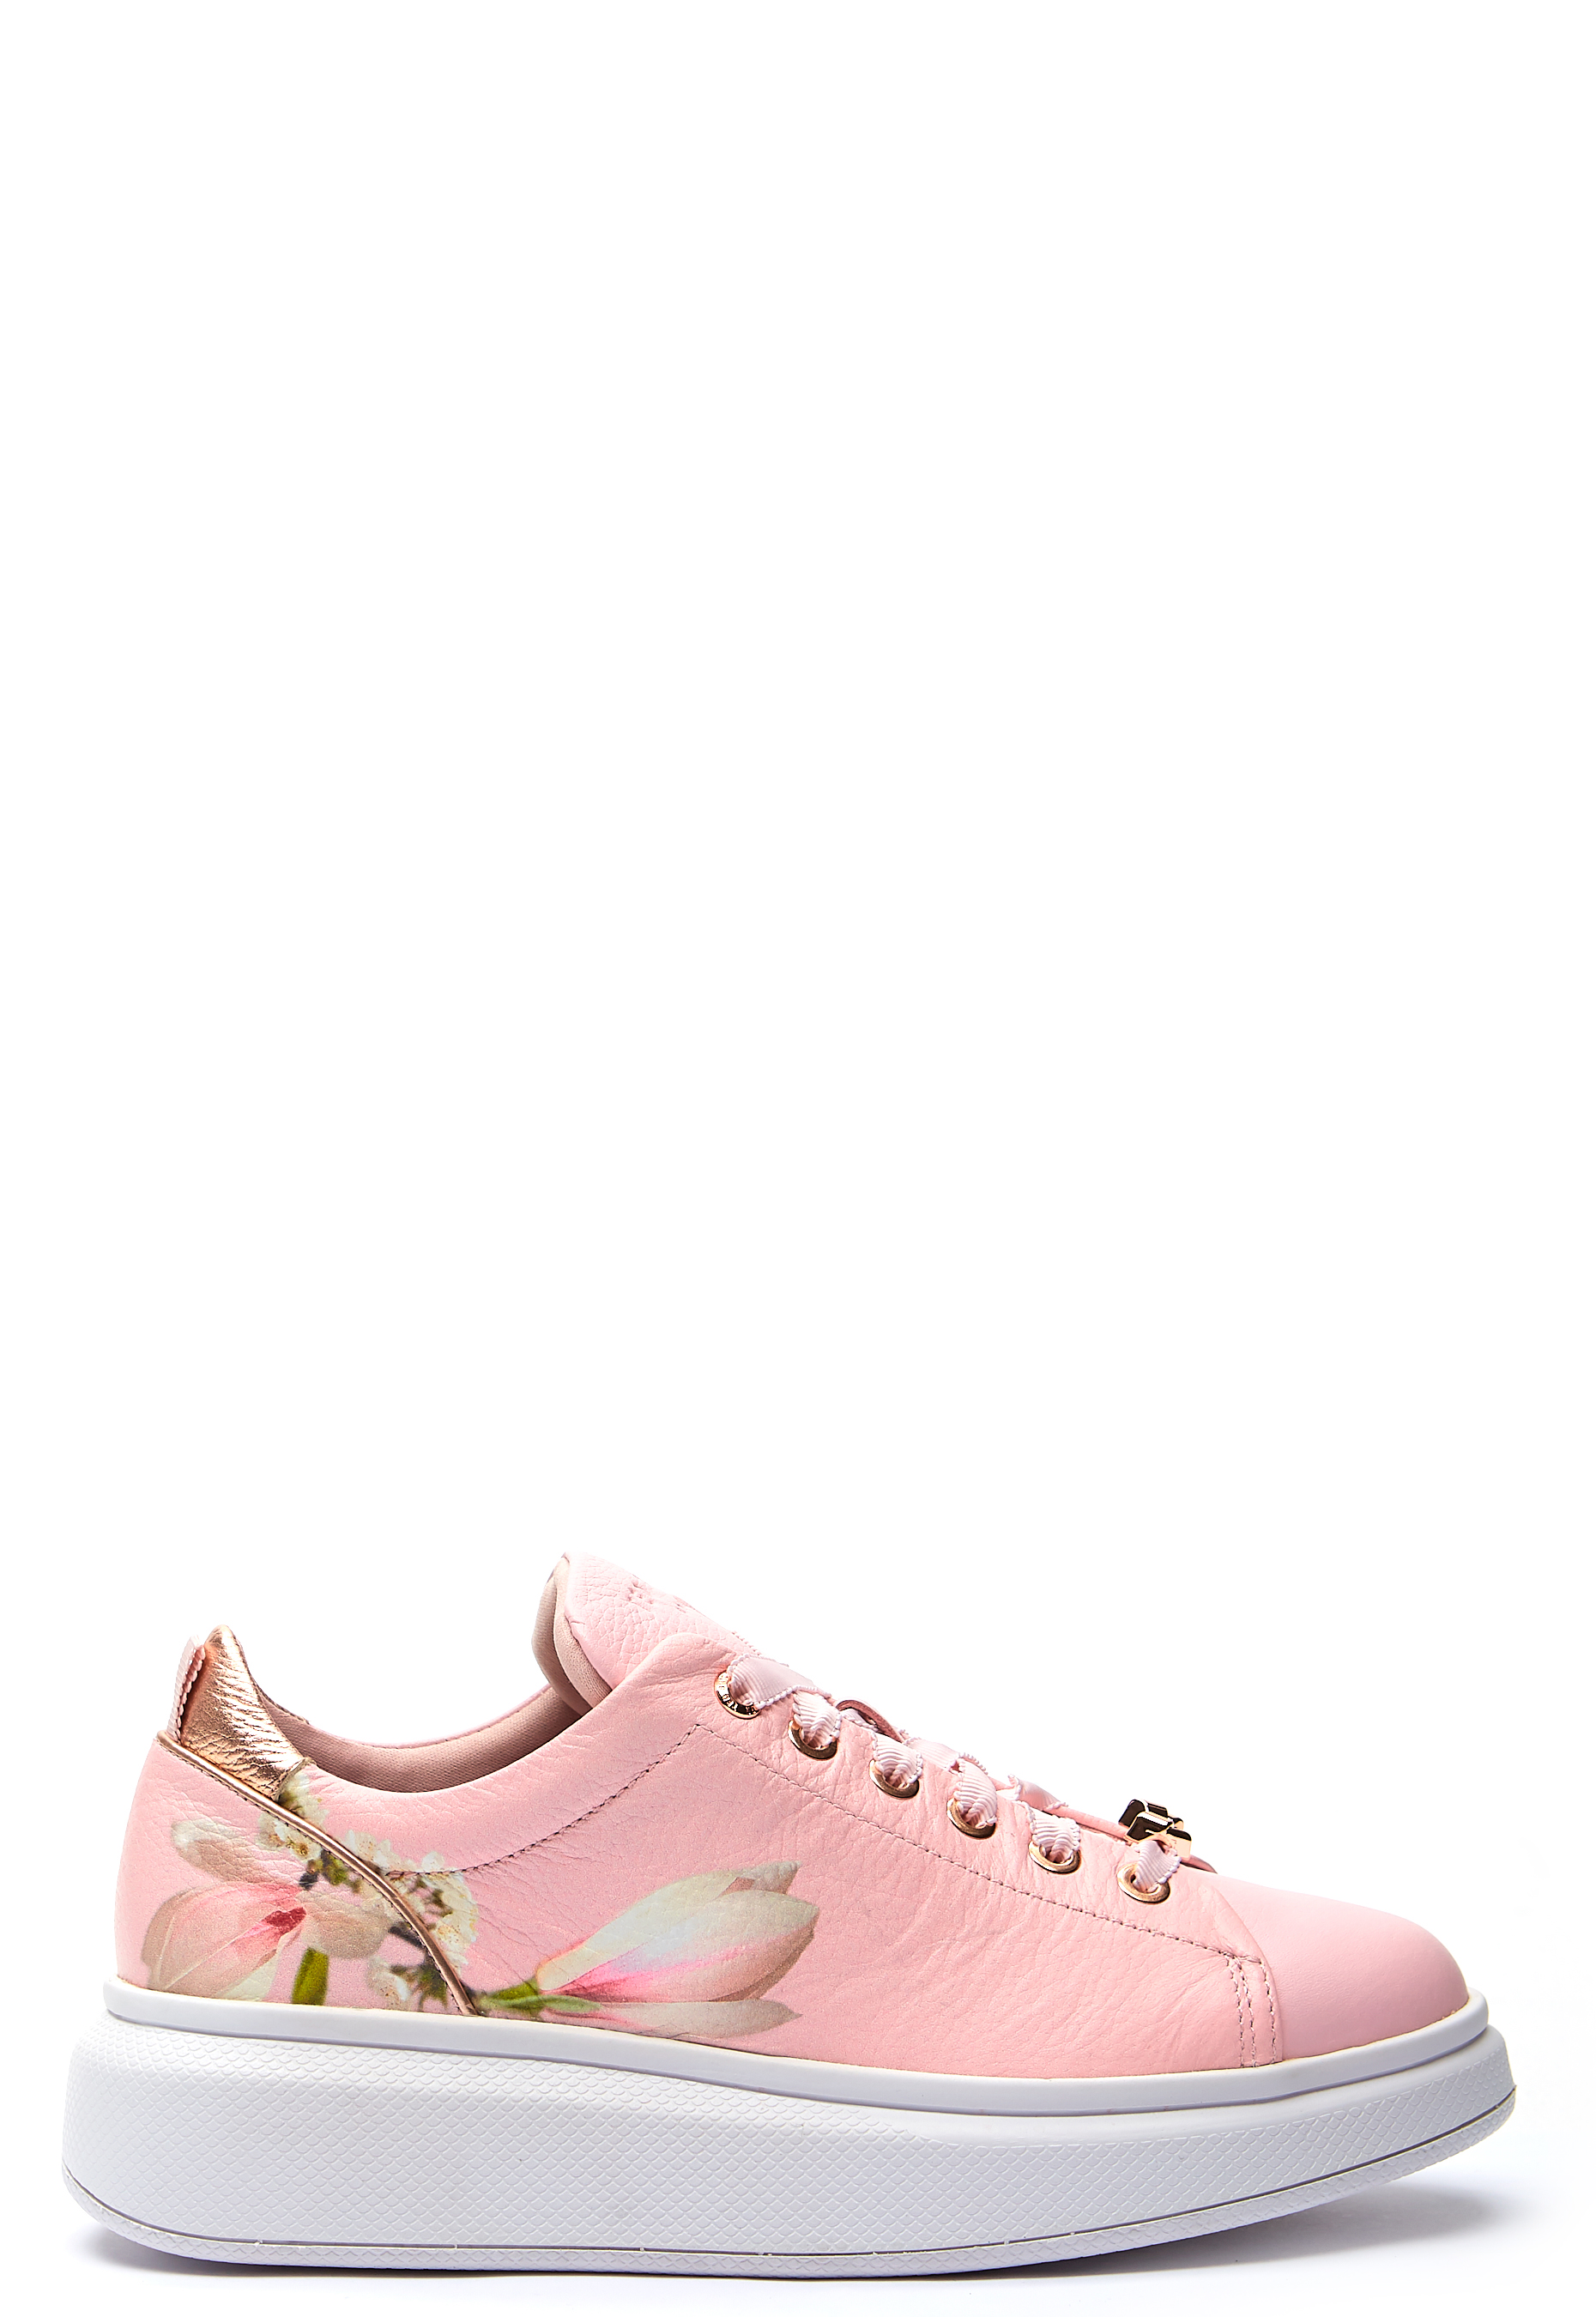 Ted Baker Ailbe Shoes Blossom Harmony 